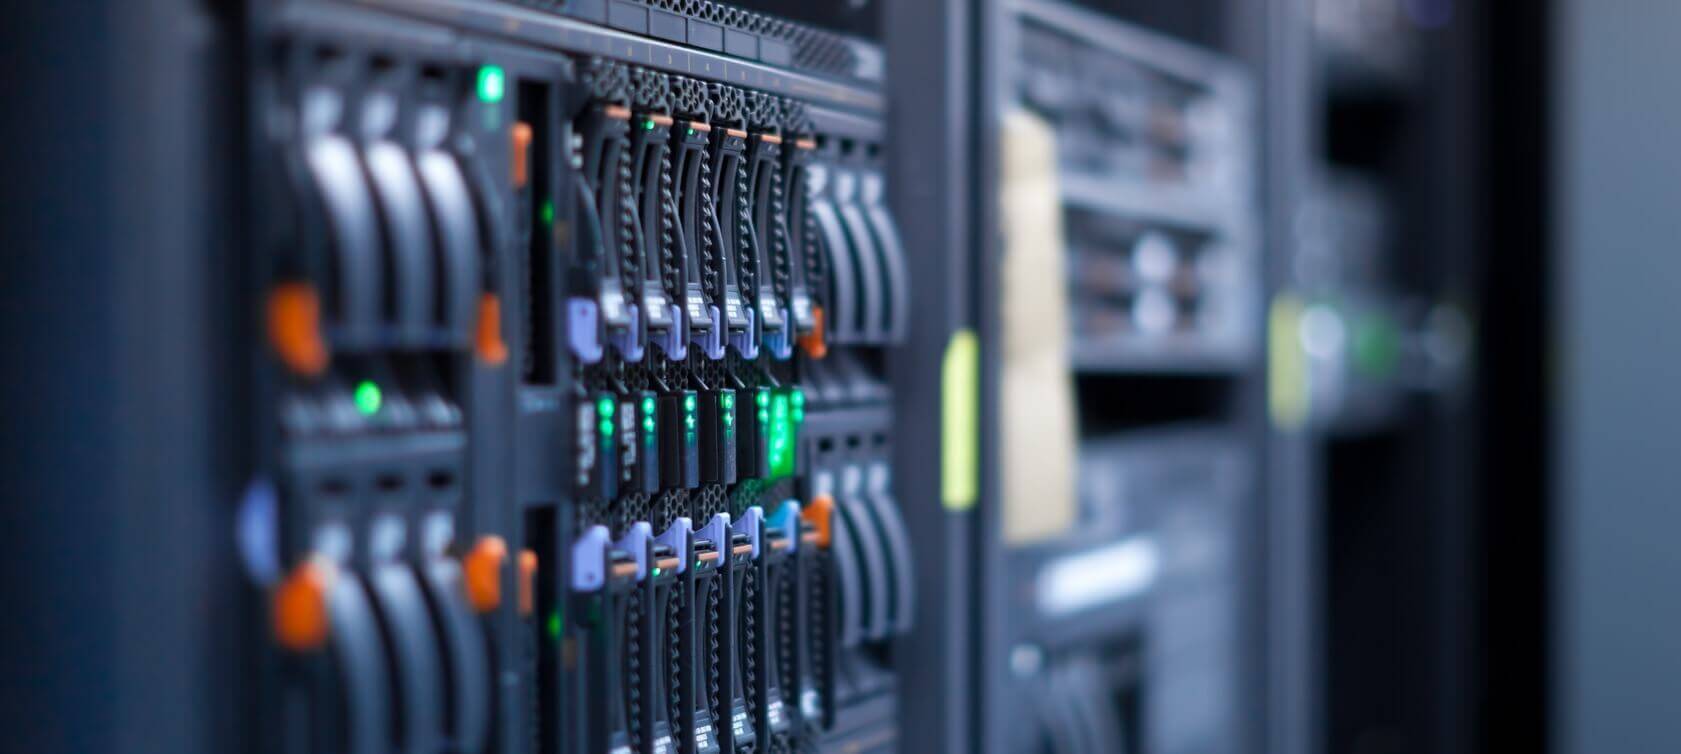 Why Should You Use IT Managed Services Provider?